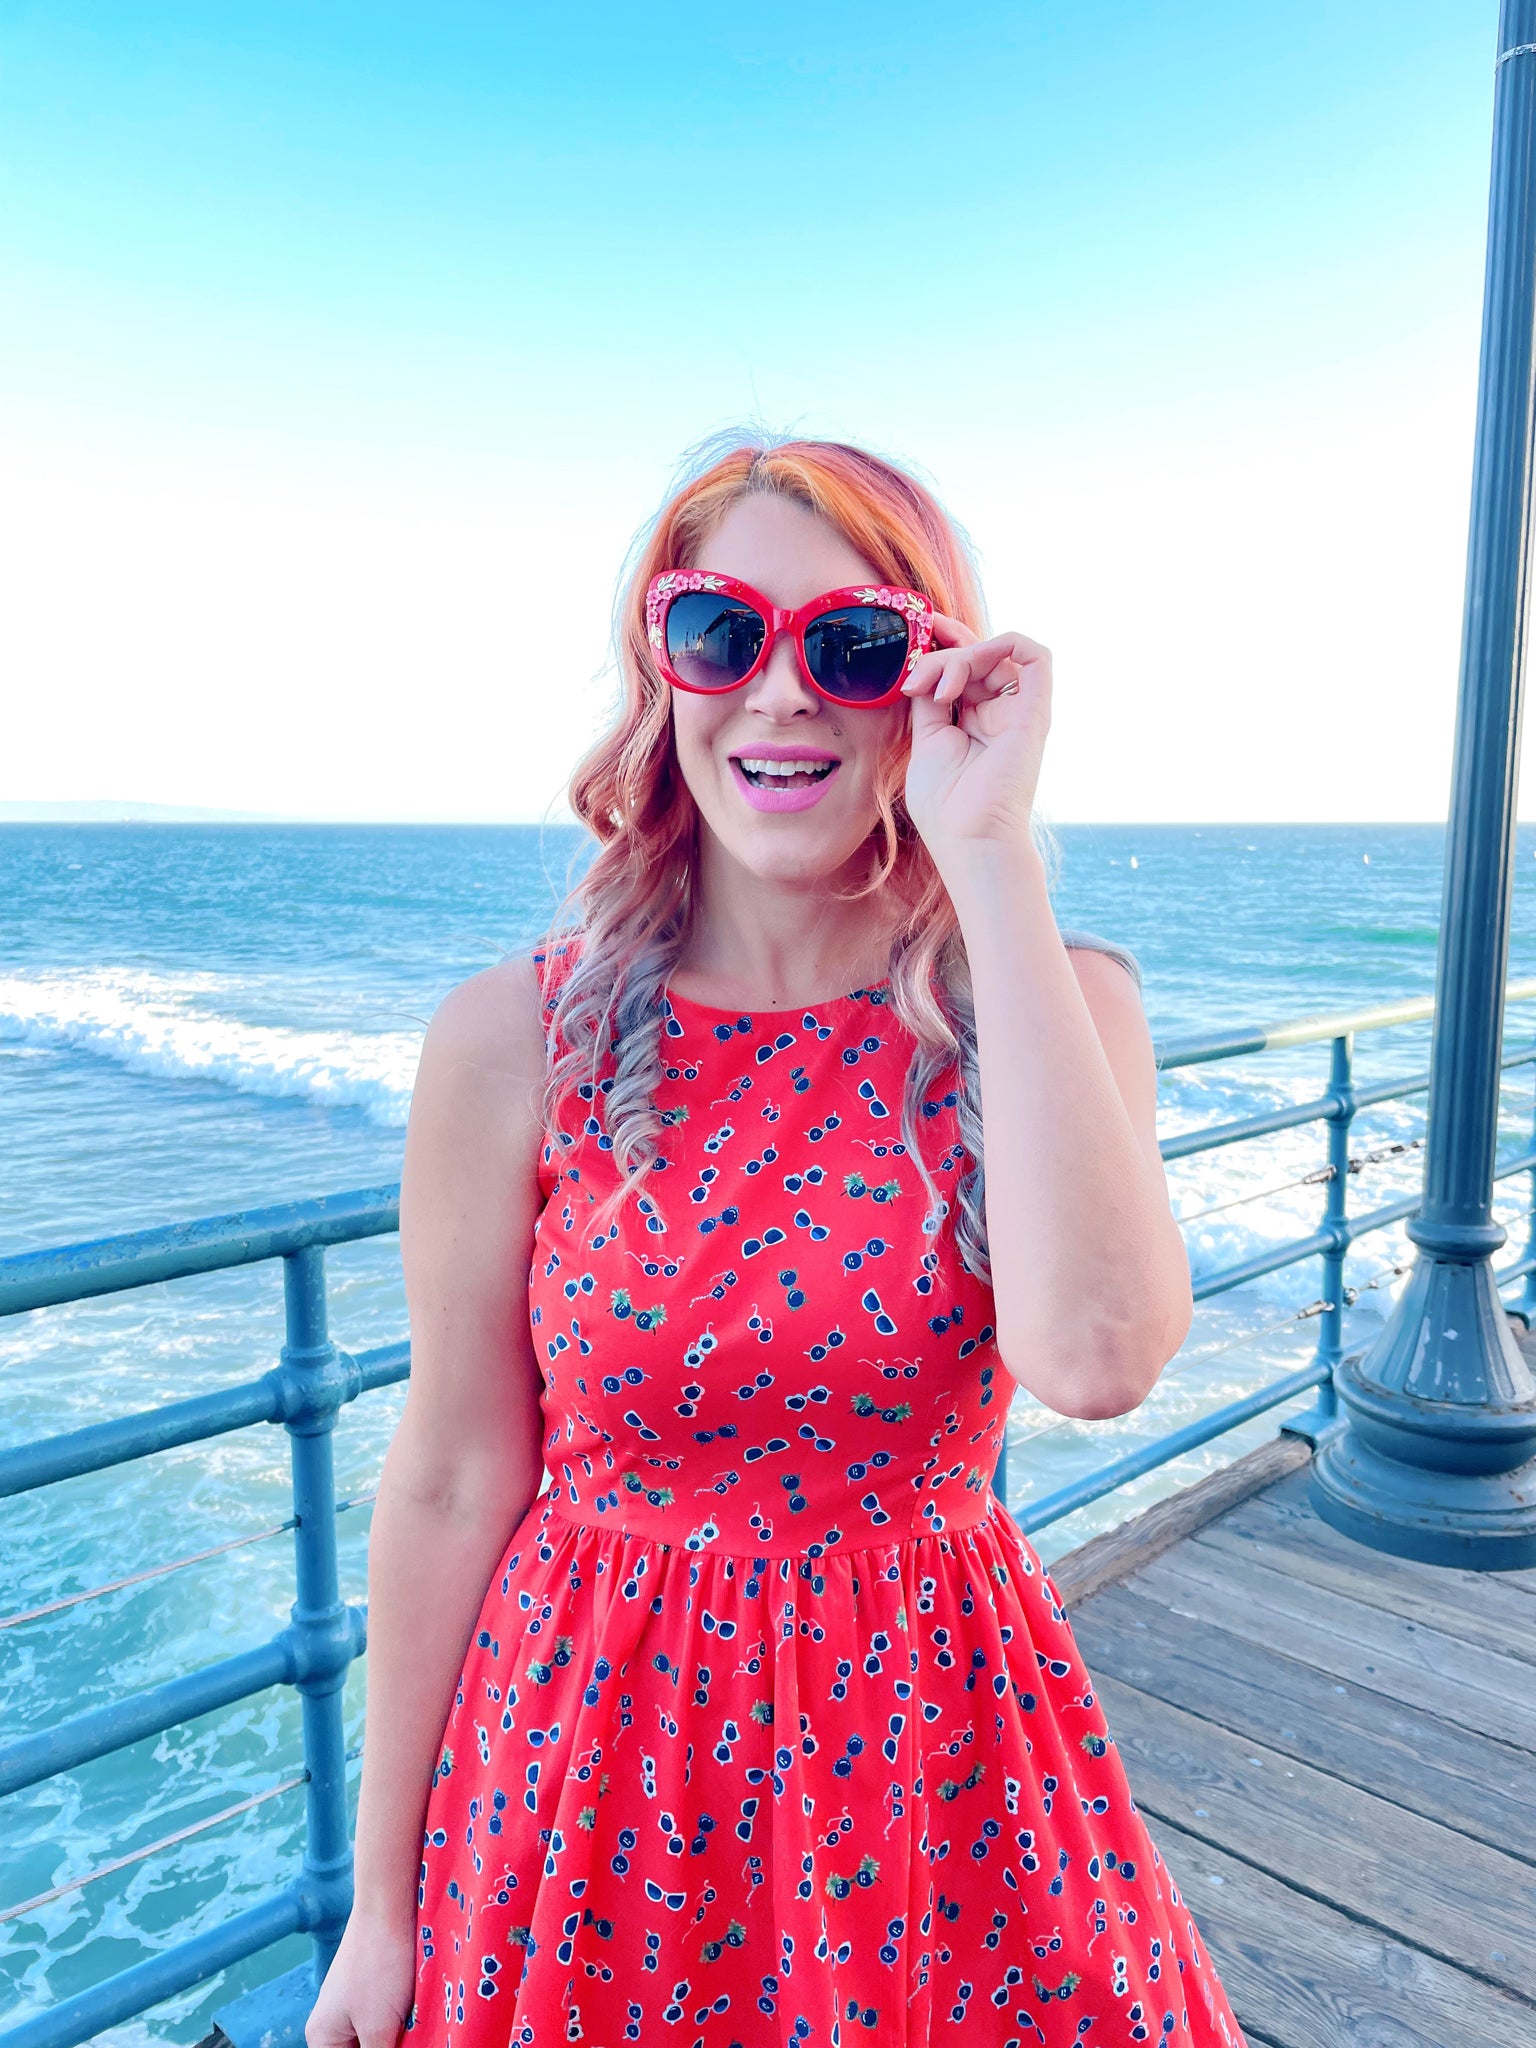 a close up of model standing on the boardwalk in front of the ocean wearing sunglasses vintage dress and red sunglasses